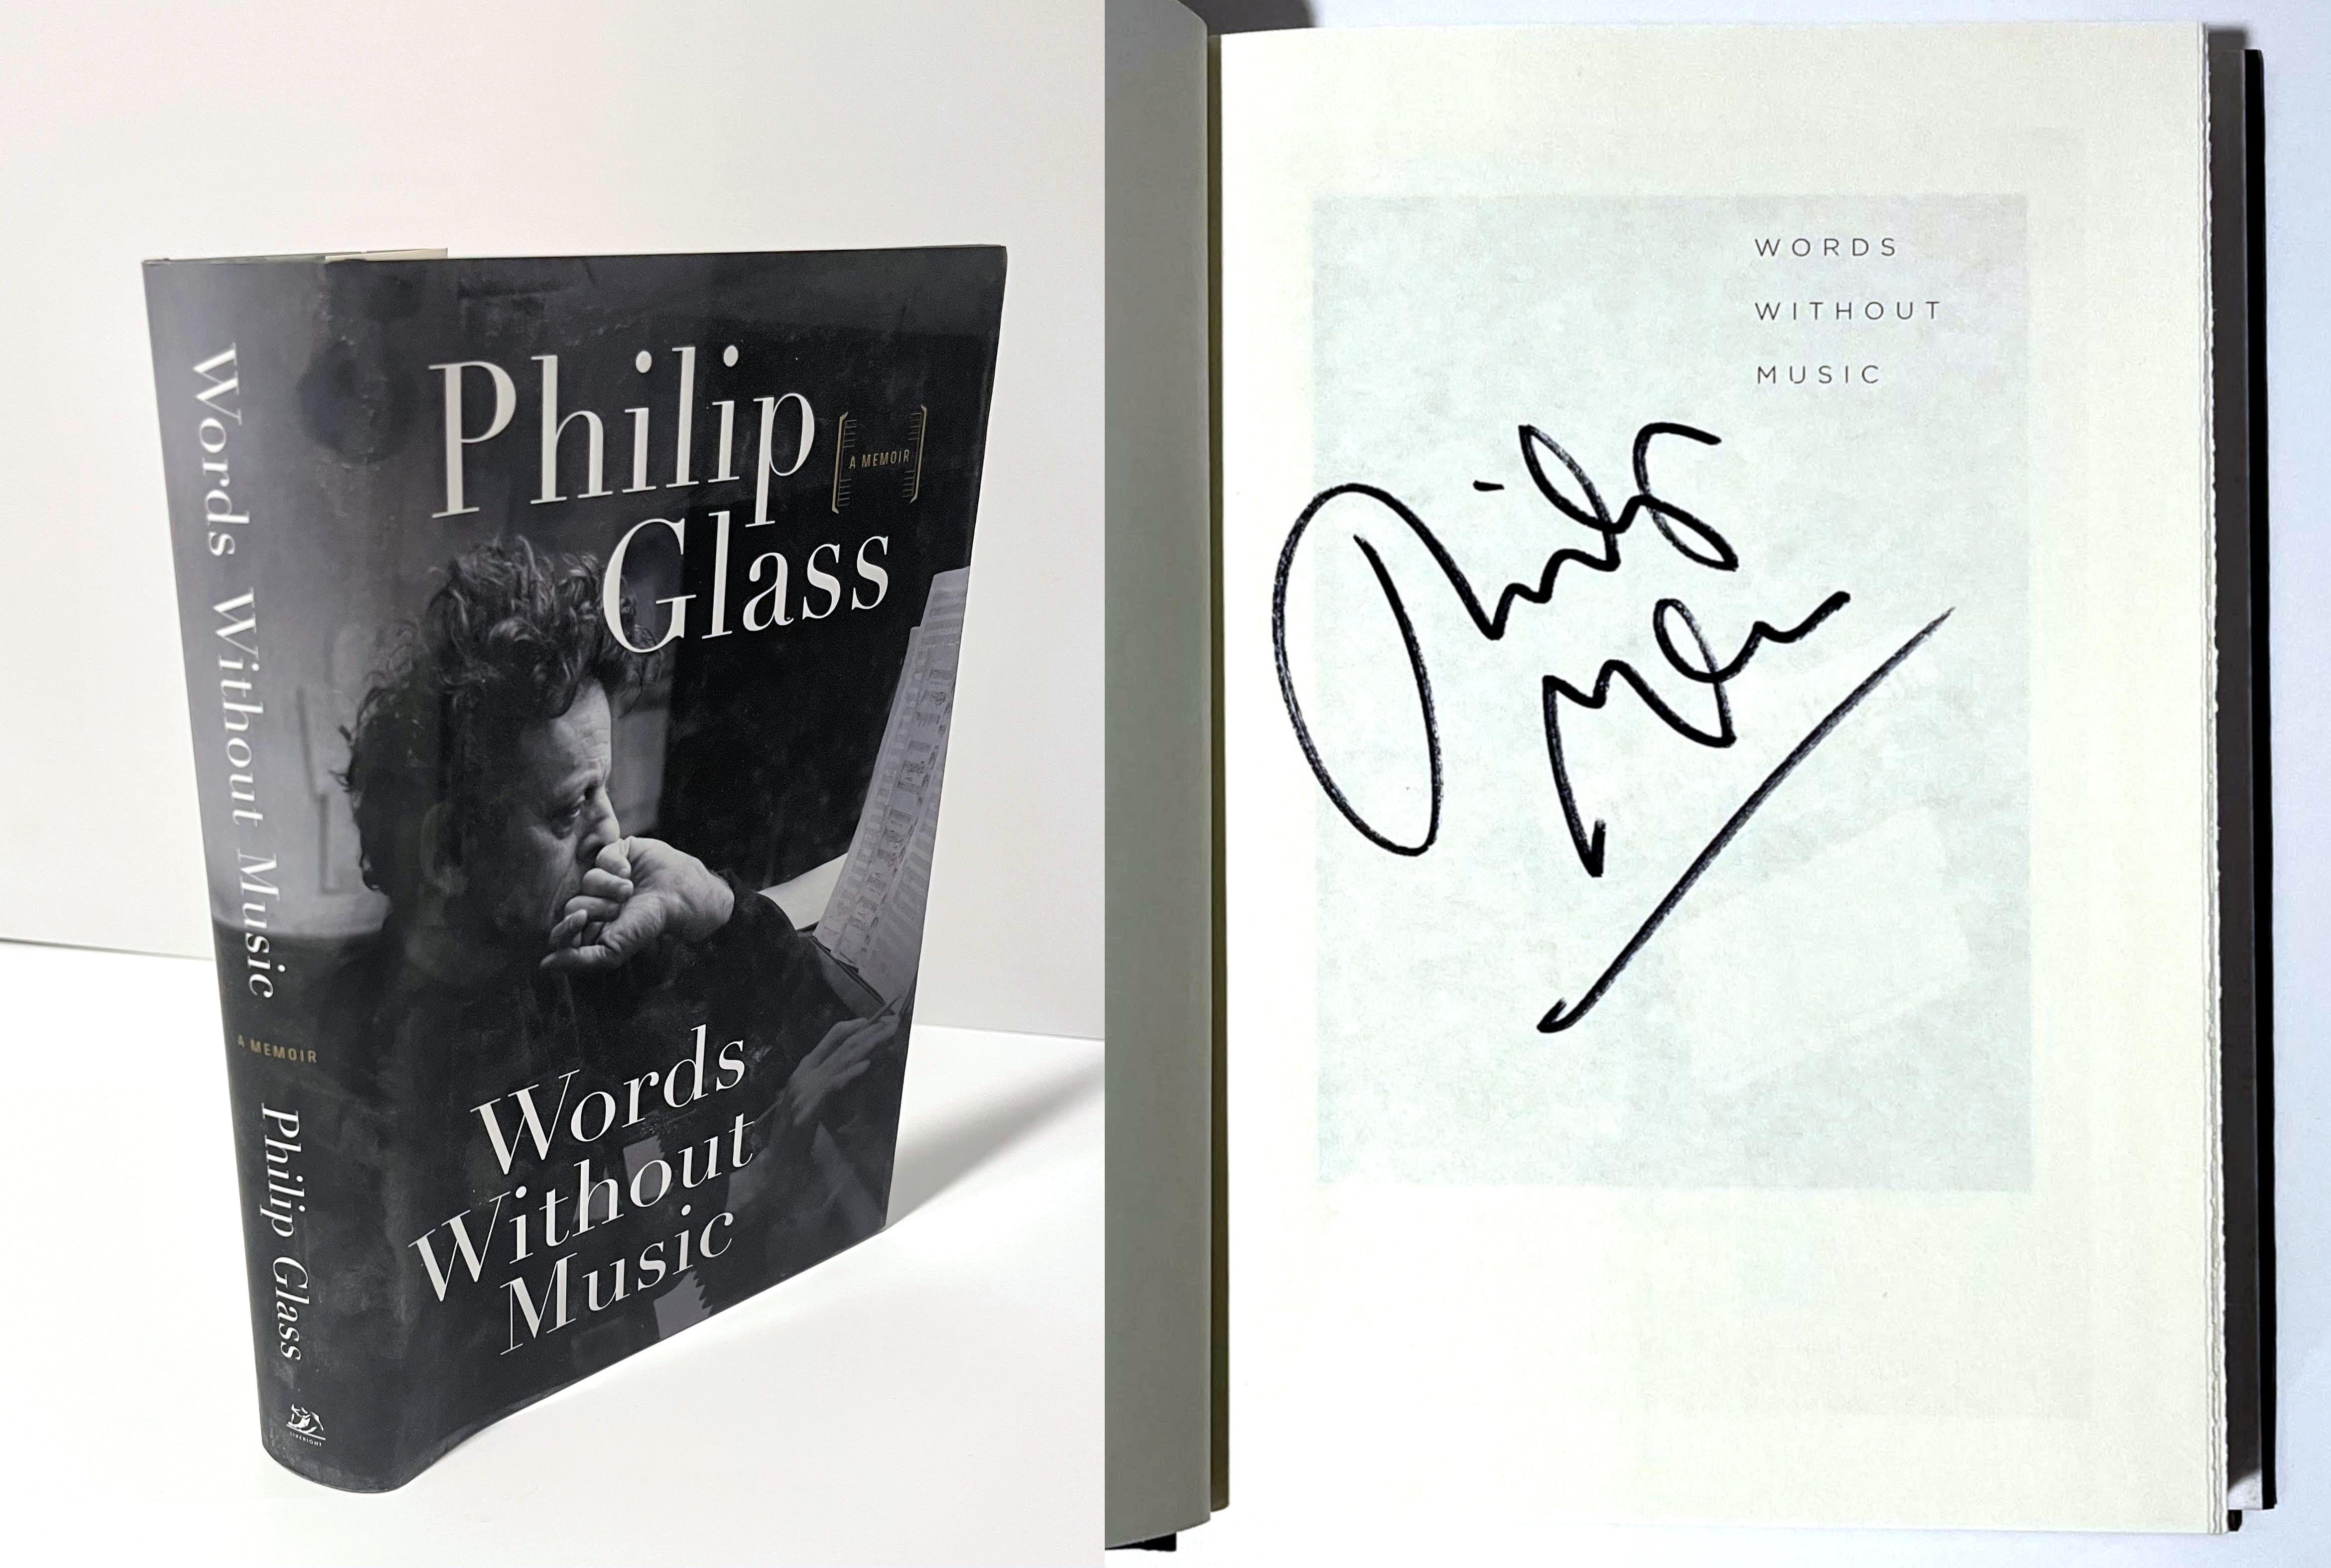 Philip Glass Words Without Music (hand signed by Philip Glass), 2015
Hardback monograph with dust jacket (hand signed by Philip Glass)
Hand signed by Philip Glass on the half title page
9 1/2 × 6 1/2 × 1 1/4 inches
Hand signed by Philip Glass on the